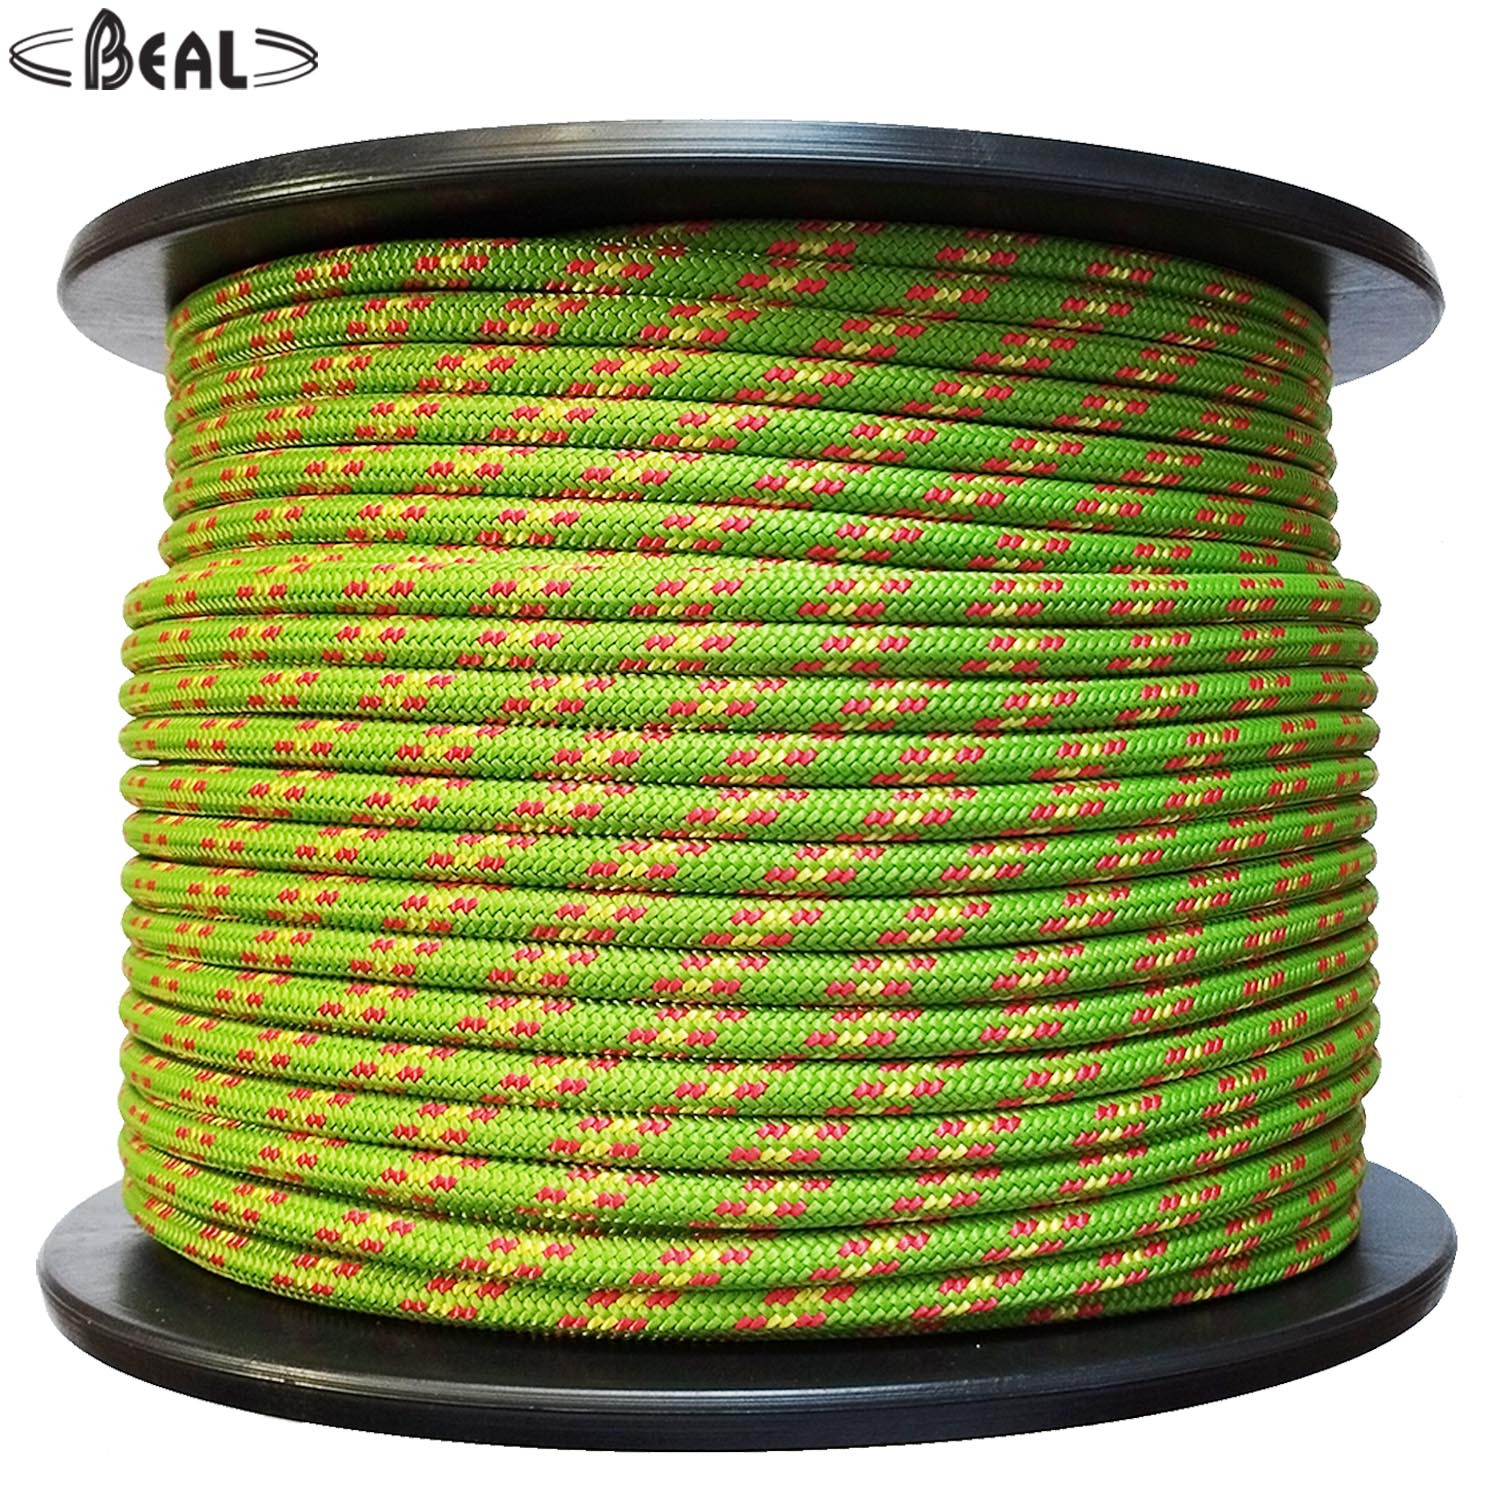 Beal 7 mm Accessory Cord 120 mtr Roll